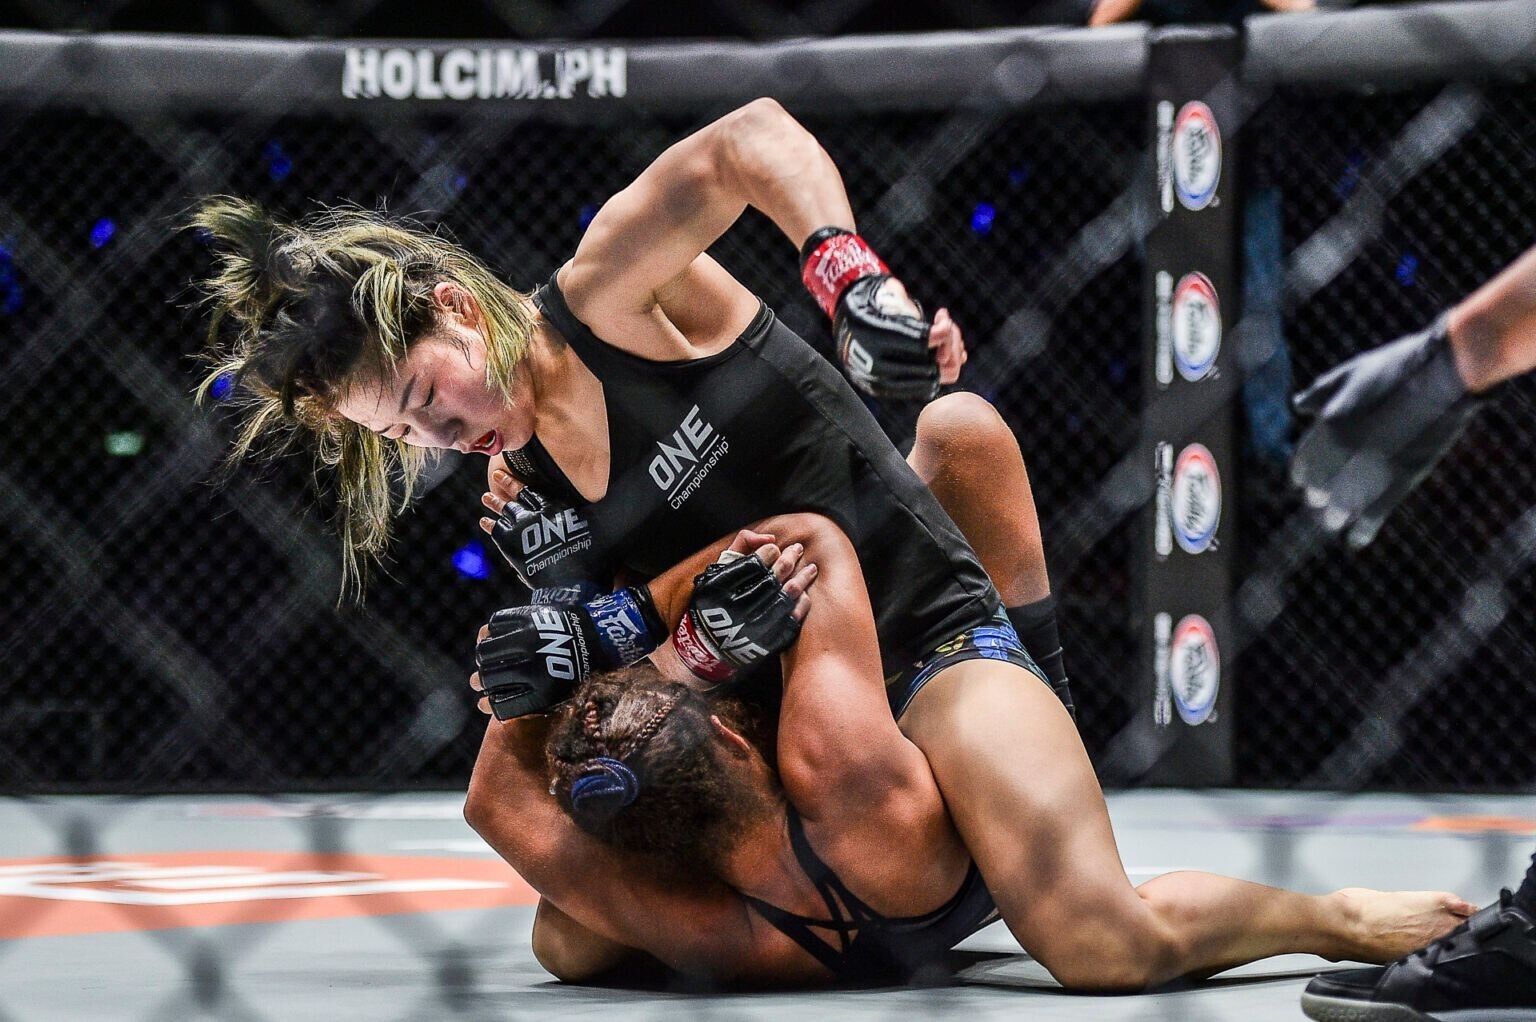 Meng Bo delivers ground and pound to Samara Santos. Photos: ONE Championship